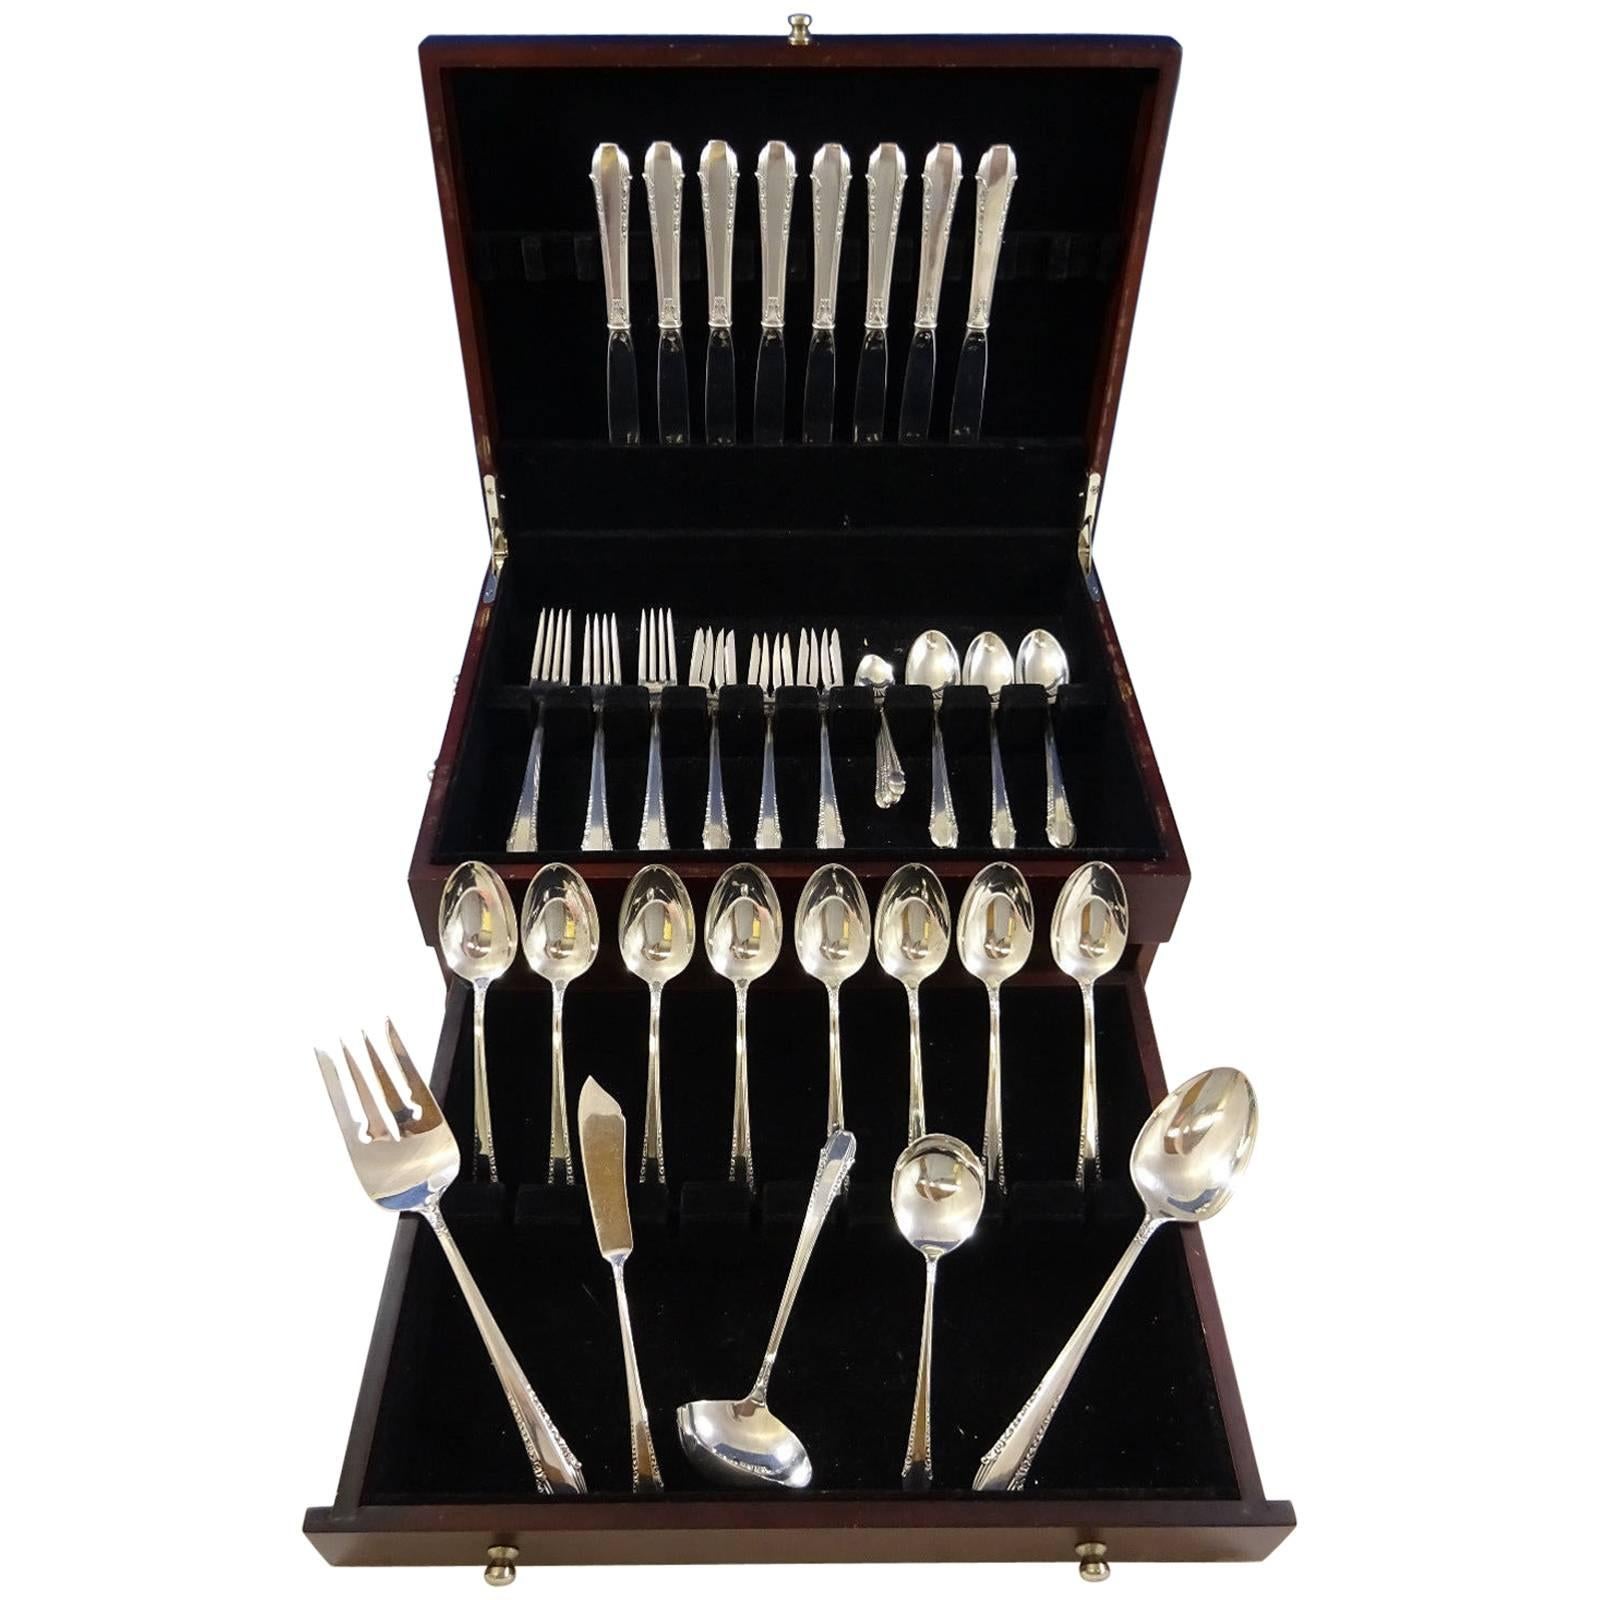 Enchantress by International sterling silver flatware set of 53 pieces. This set includes:

Eight knives, 8 7/8